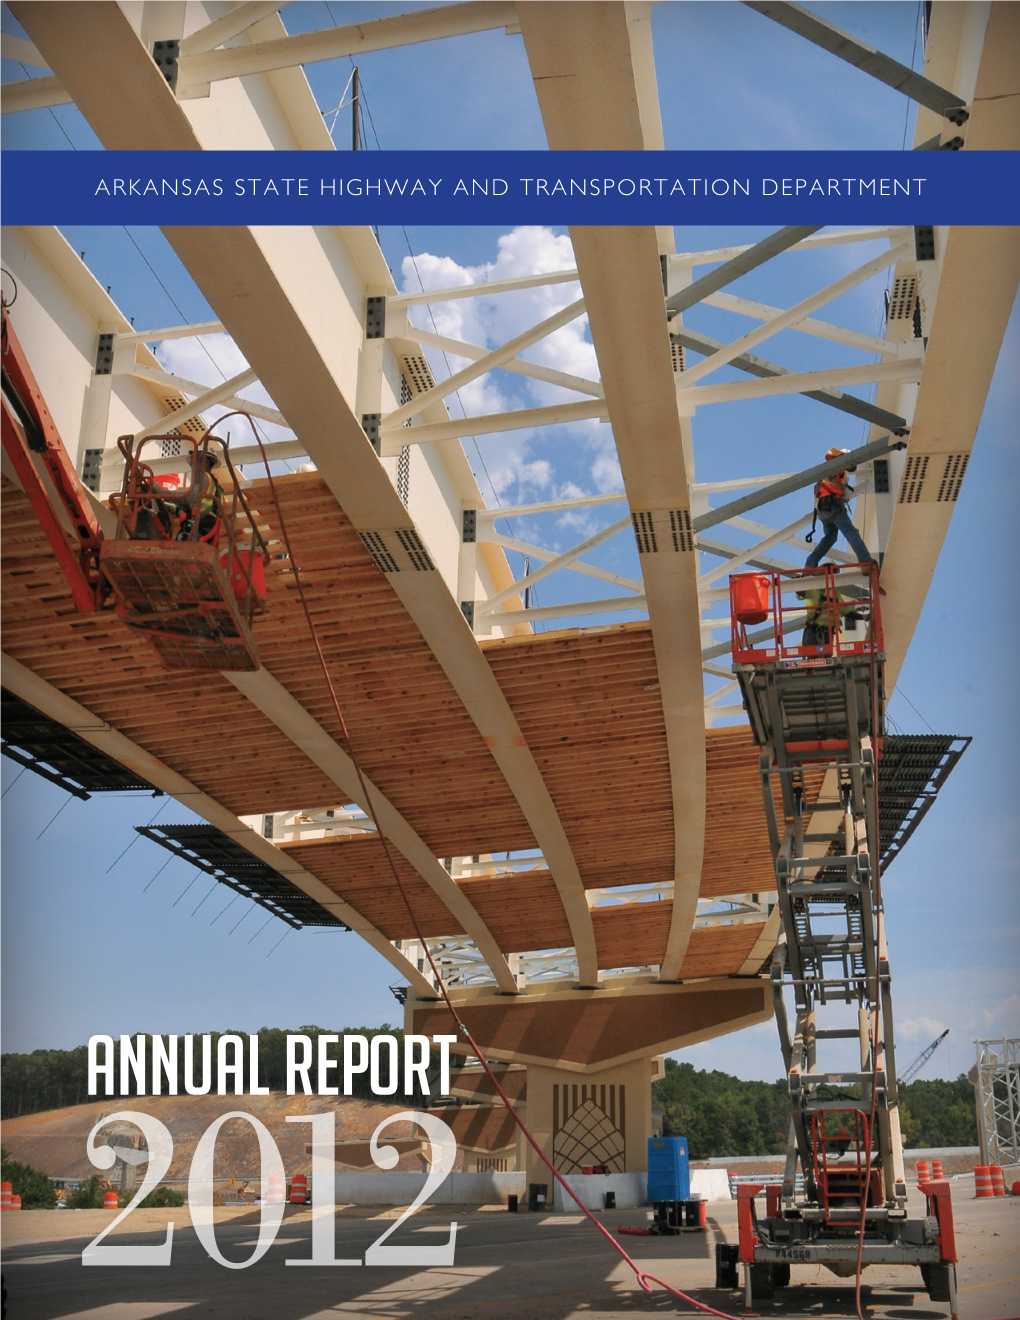 2012 Annual Report ARKANSAS STATE HIGHWAY and TRANSPORTATION DEPARTMENT